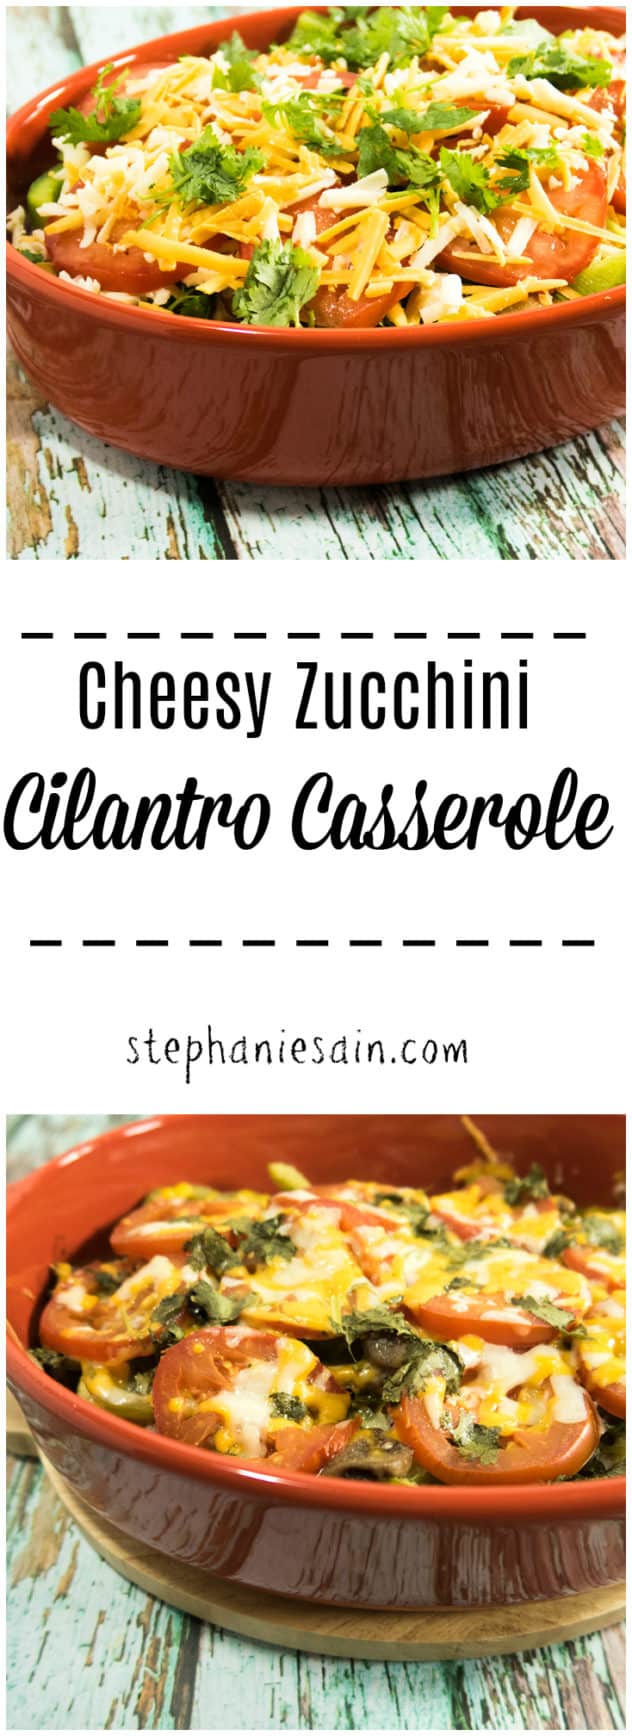 This Cheesy Zucchini Cilantro Casserole is an easy to prepare family friendly dinner perfect for any night of the week. Zucchini, cheese & fresh cilantro are the stars of this casserole. Gluten free & Vegetarian.